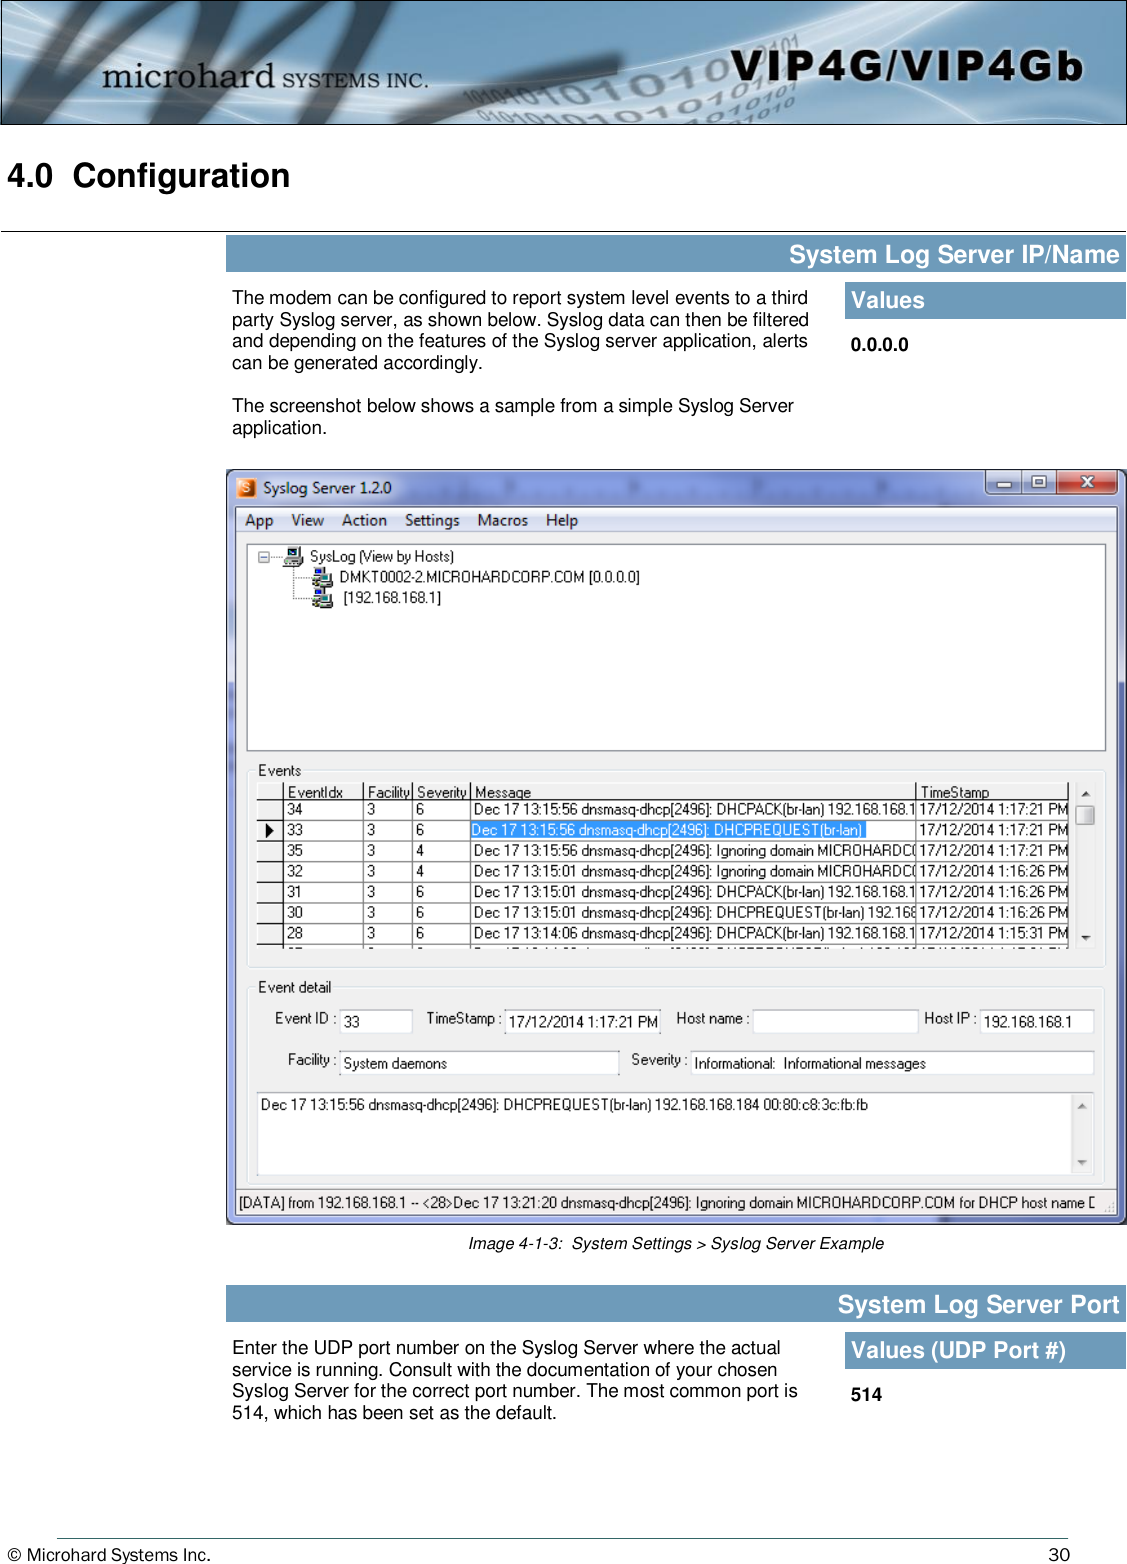 © Microhard Systems Inc.     30 4.0  Configuration  The modem can be configured to report system level events to a third party Syslog server, as shown below. Syslog data can then be filtered and depending on the features of the Syslog server application, alerts can be generated accordingly.   The screenshot below shows a sample from a simple Syslog Server application.                                                 System Log Server IP/Name Values 0.0.0.0 Enter the UDP port number on the Syslog Server where the actual service is running. Consult with the documentation of your chosen Syslog Server for the correct port number. The most common port is 514, which has been set as the default.                                                 System Log Server Port Values (UDP Port #) 514 Image 4-1-3:  System Settings &gt; Syslog Server Example 